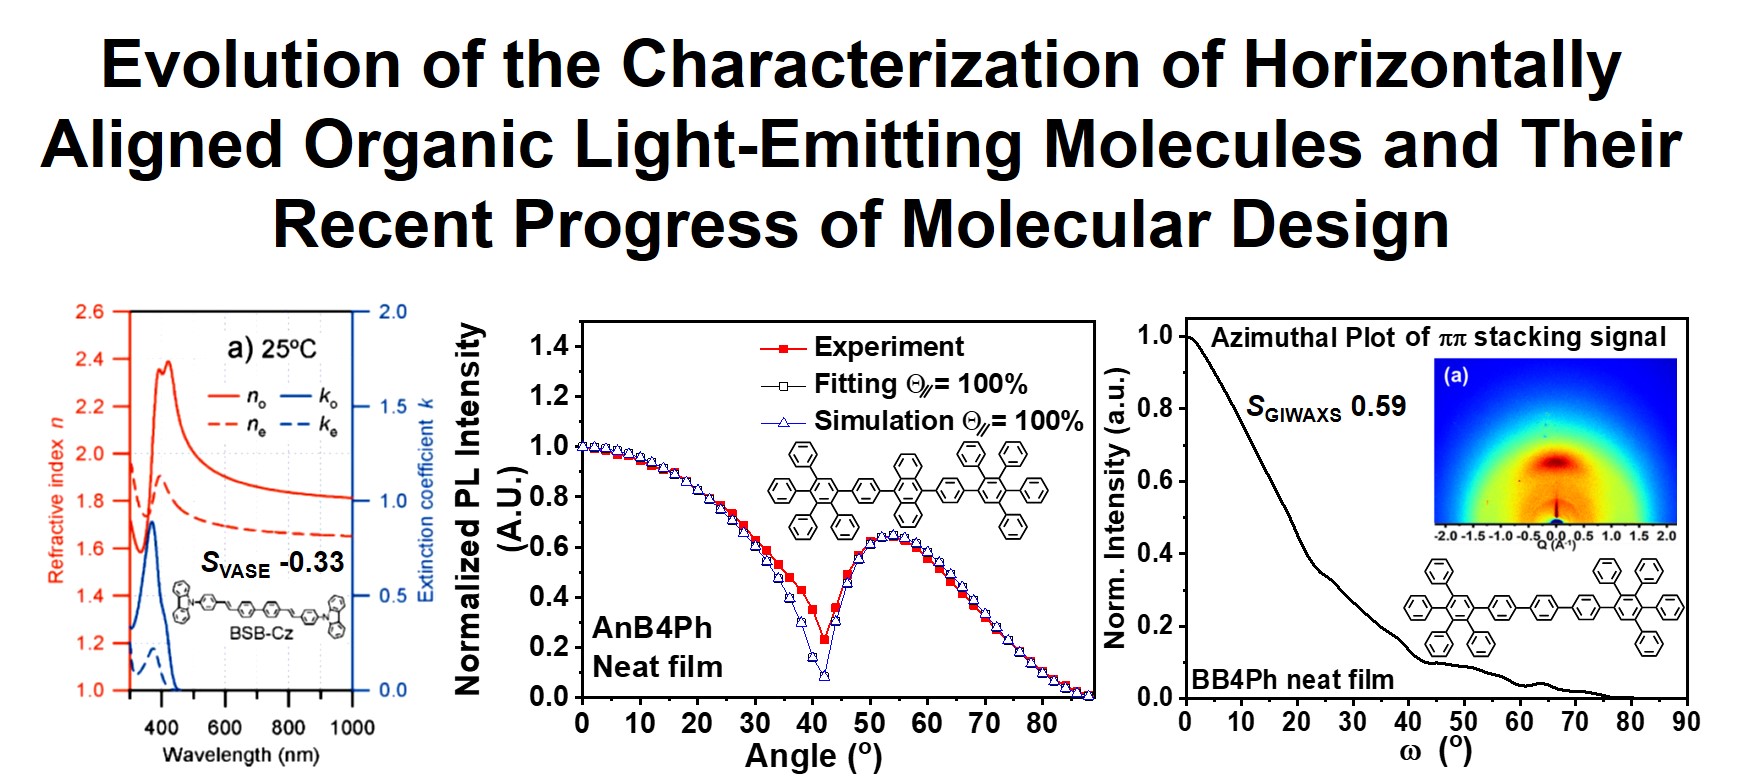 Evolution of the Characterization of Horizontally Aligned Organic Light-Emitting Molecules and Their Recent Progress of Molecular Design 